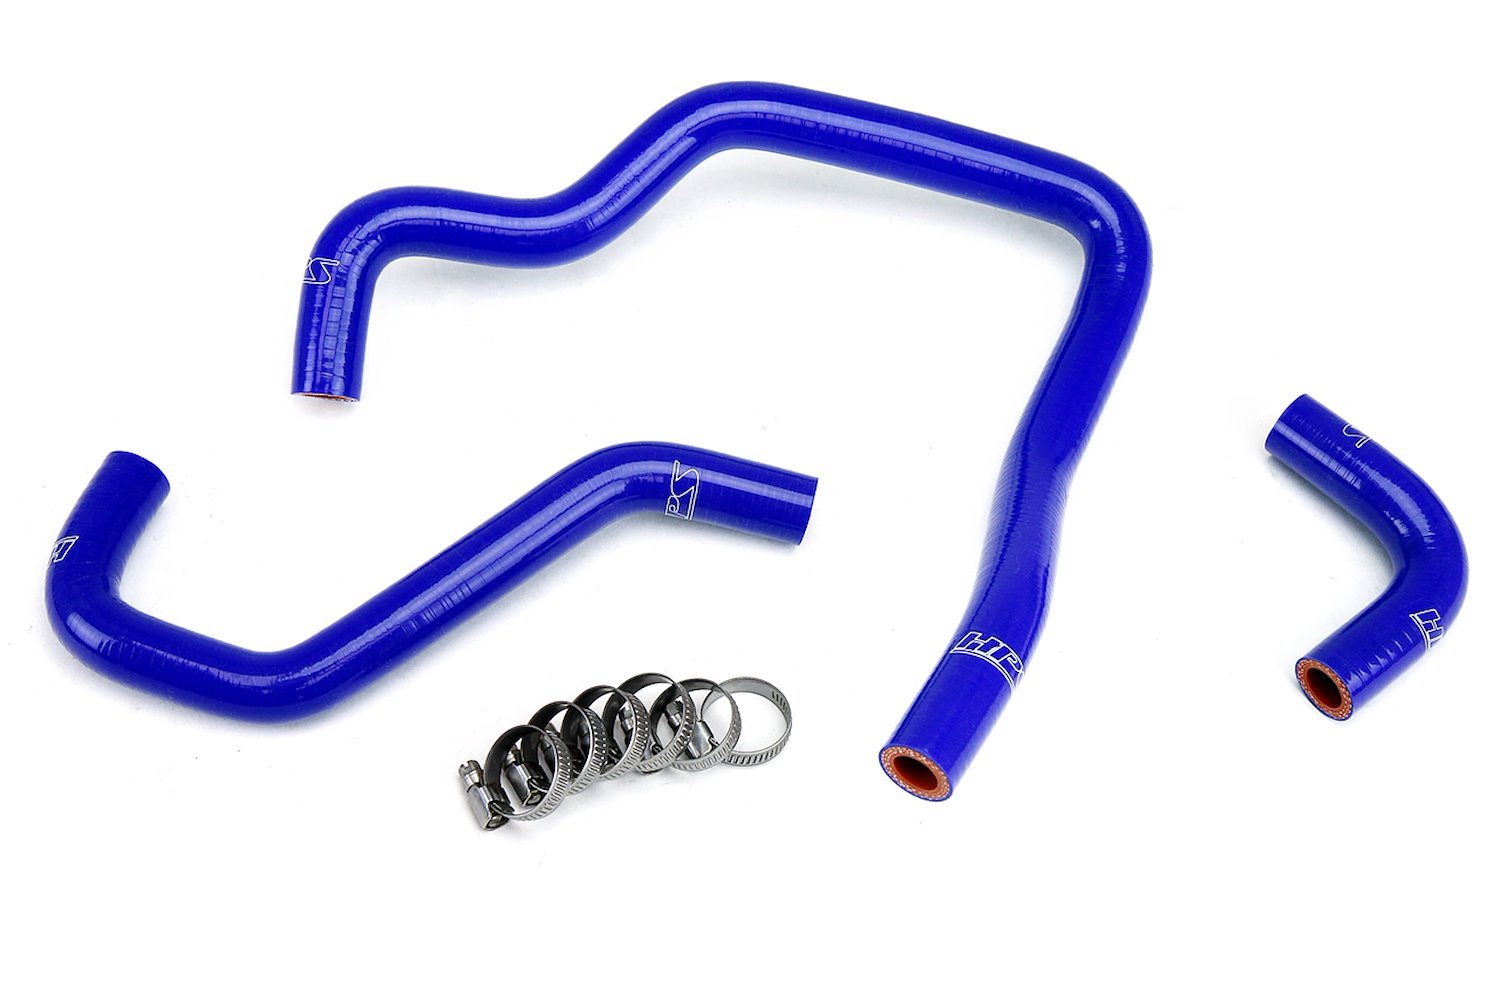 57-1430-BLUE Heater Hose Kit, High-Temp 3-Ply Reinforced Silicone, Replace OEM Rubber Heater Coolant Hoses